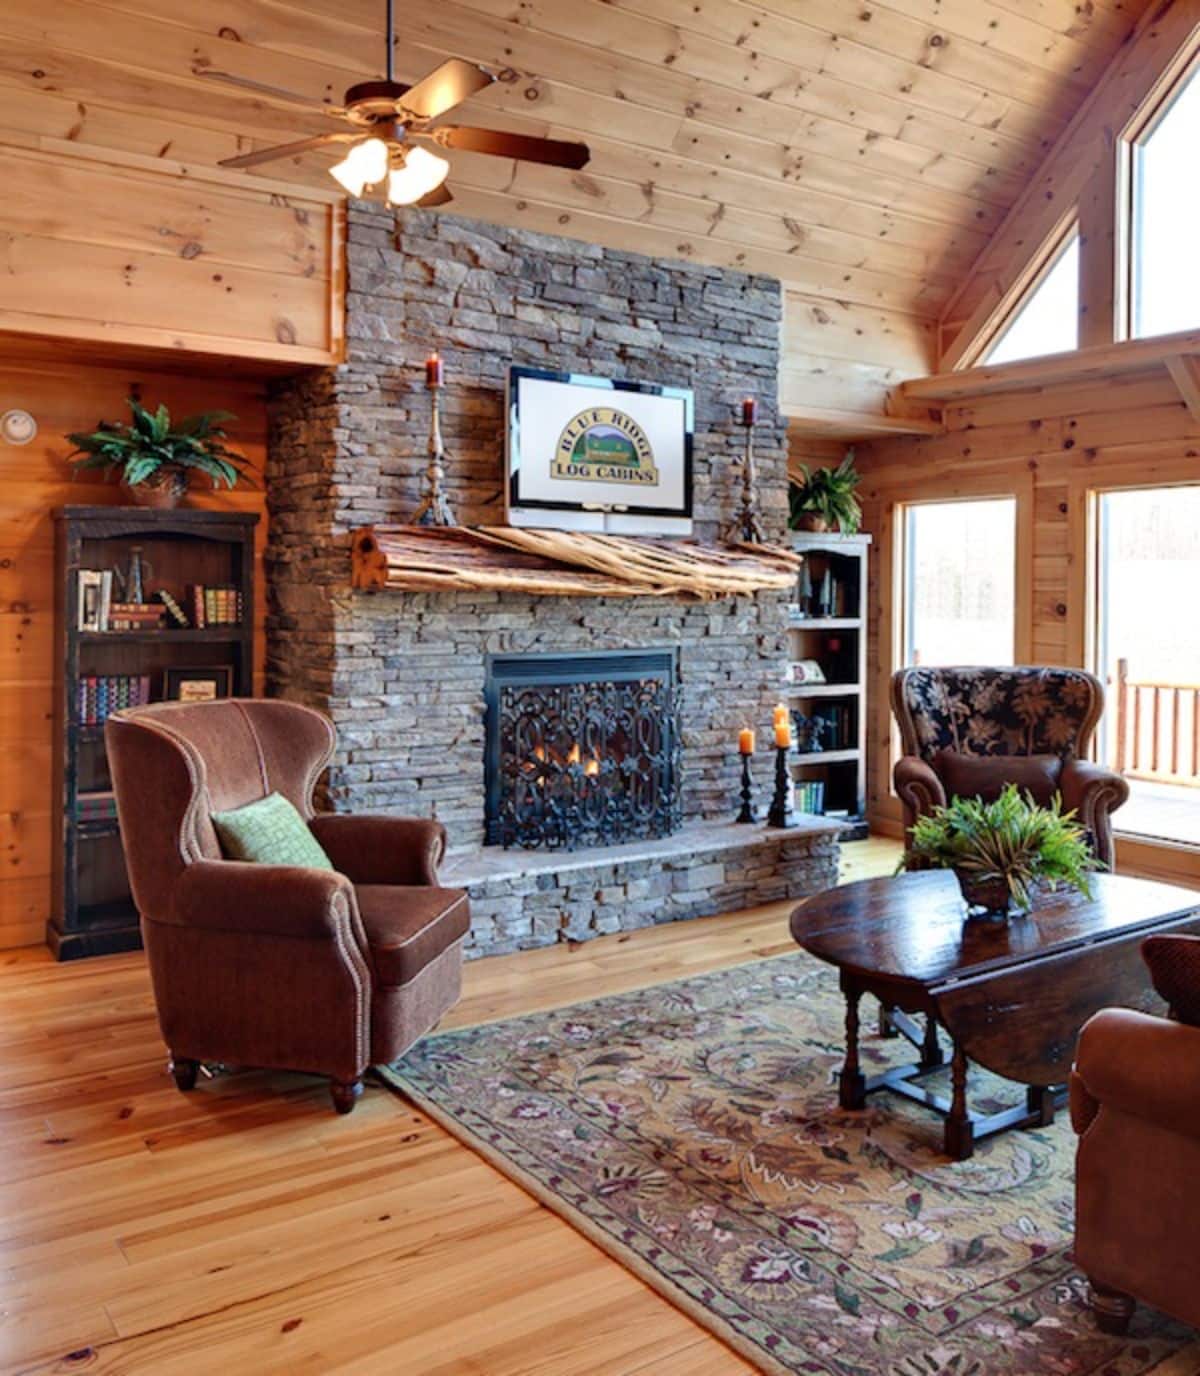 stone fireplace against wall in living room with brown chairs and windows on right